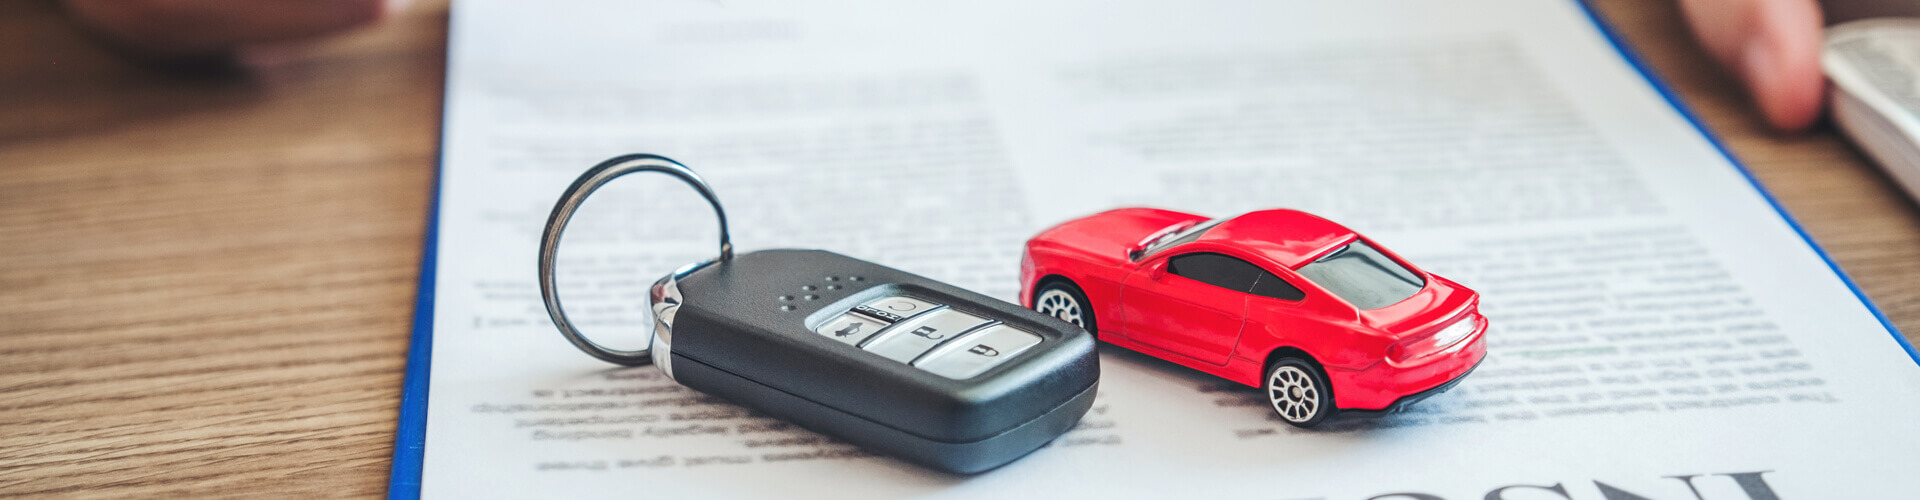 affordable car insurance vehicle insurance vehicle insurance affordable auto insurance